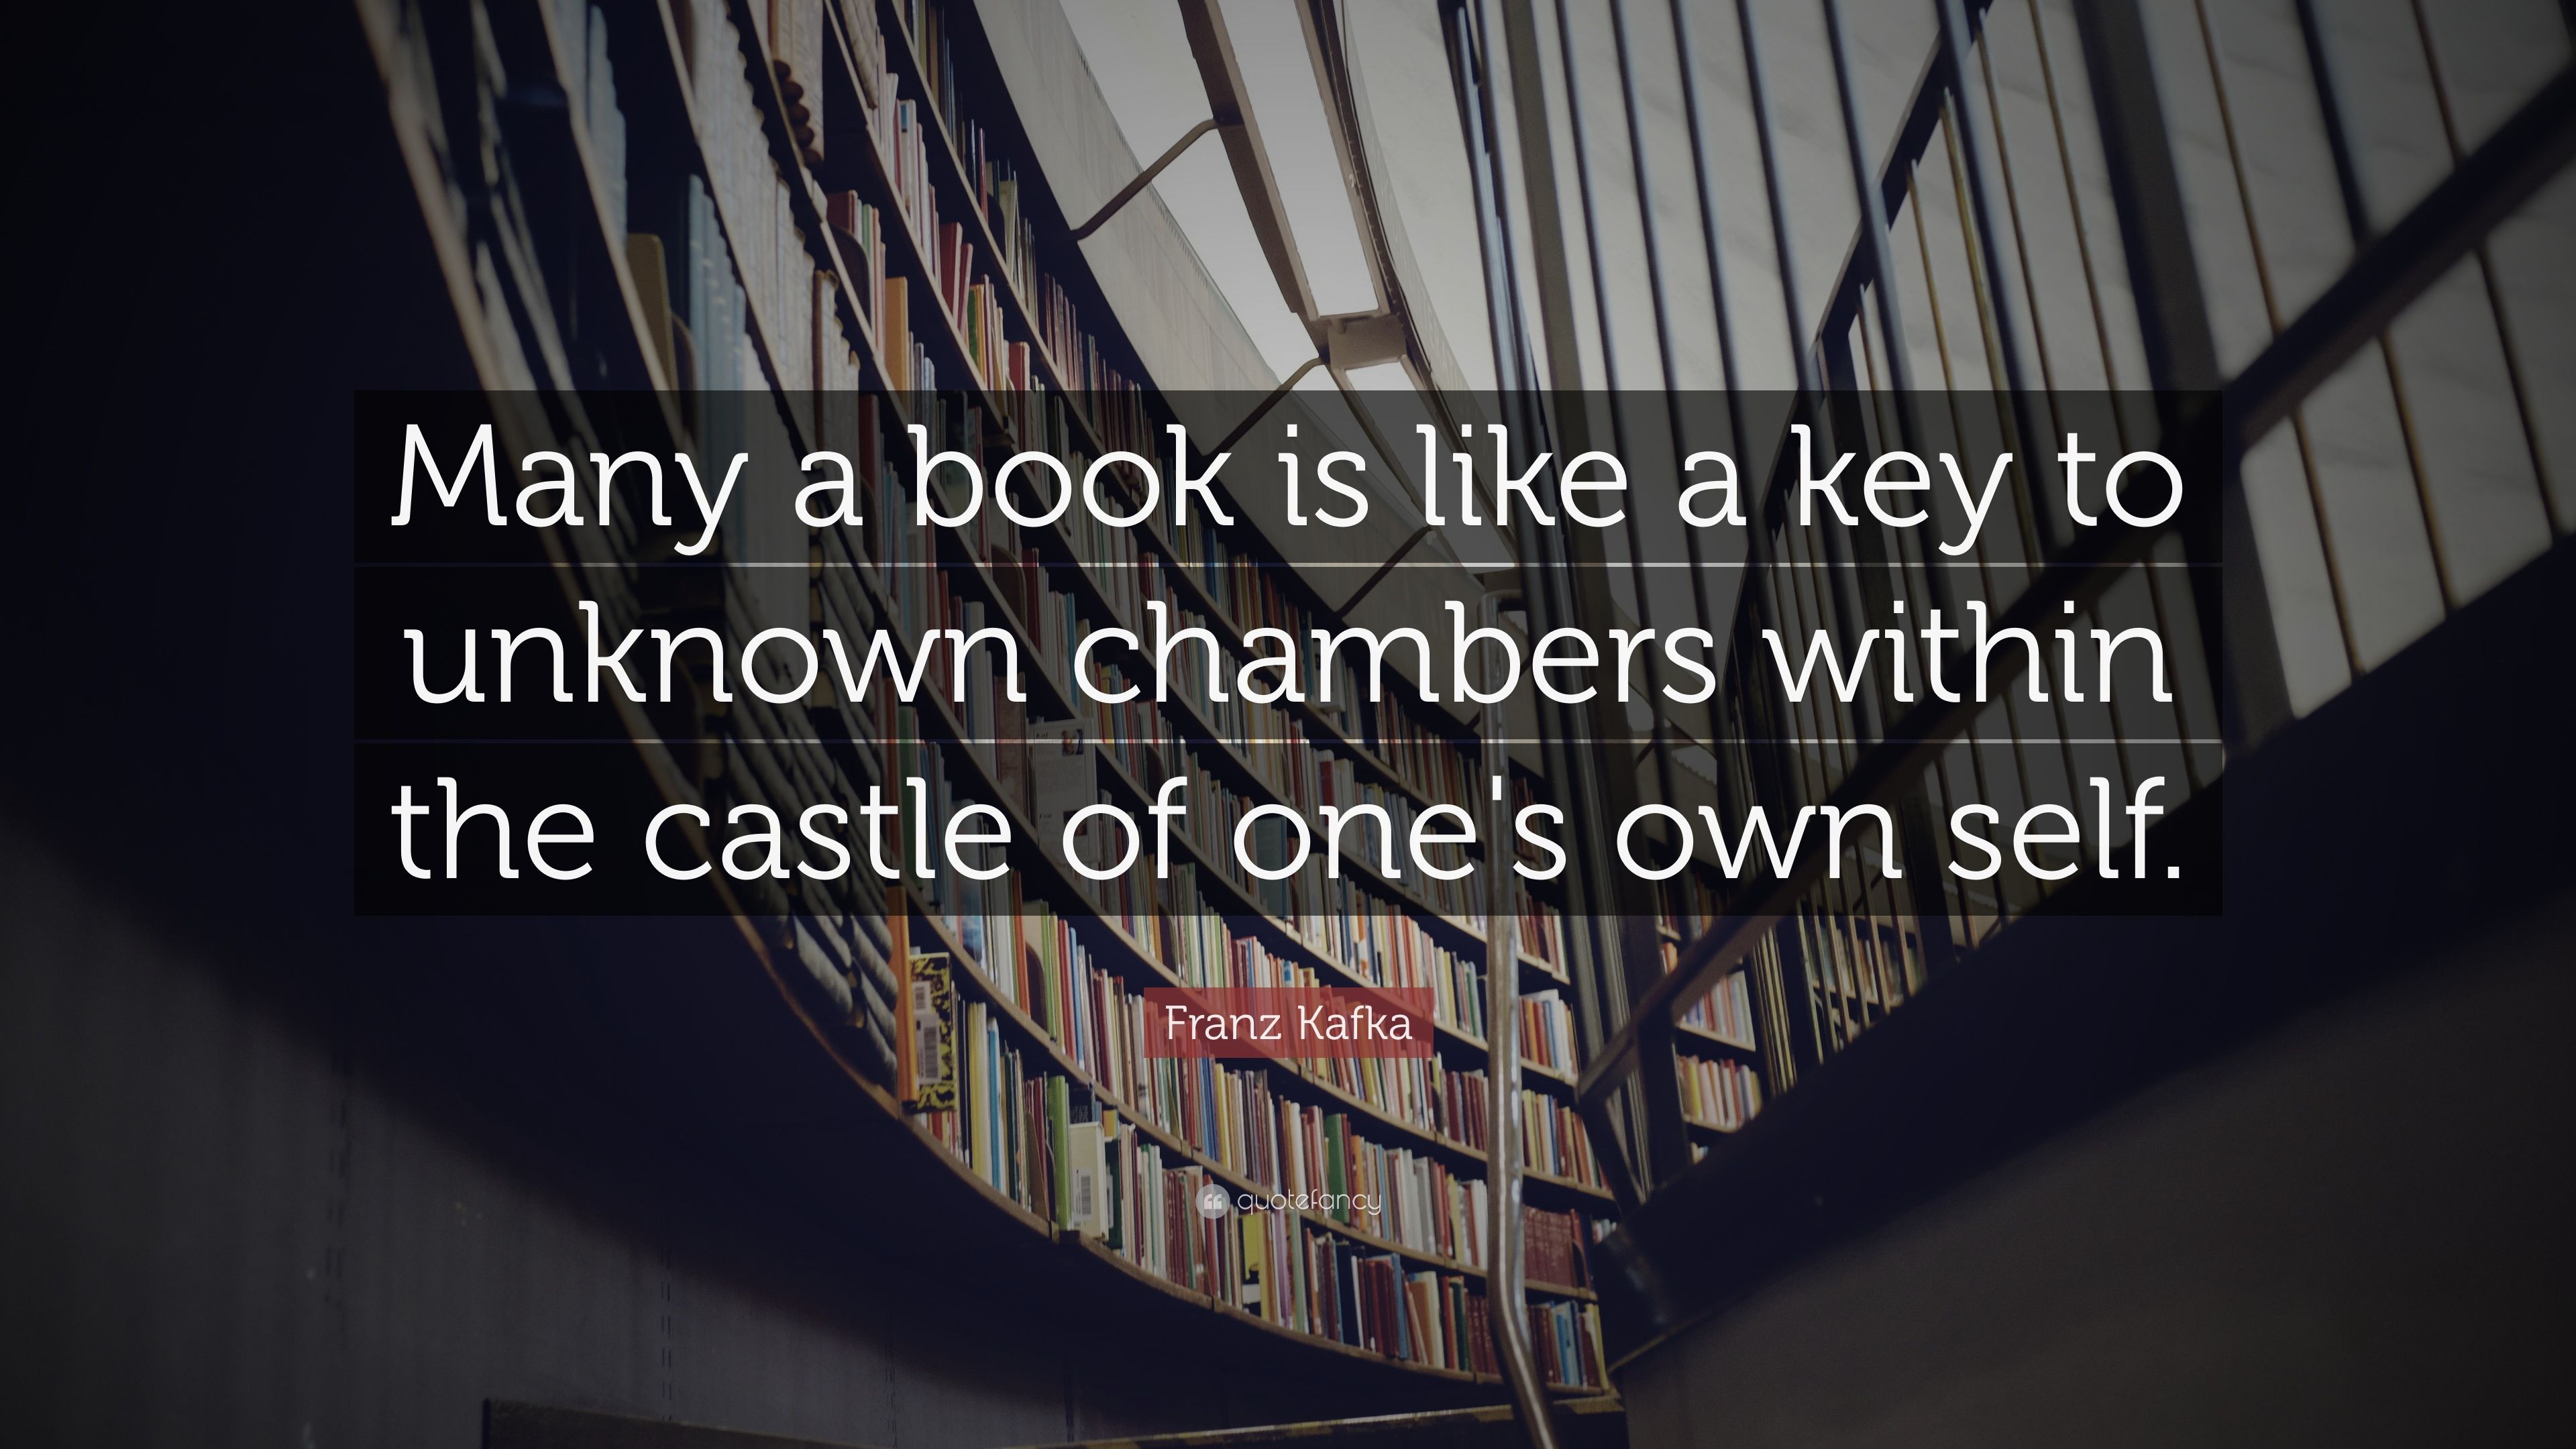 Franz Kafka Quote: "Many a book is like a key to unknown chambers.